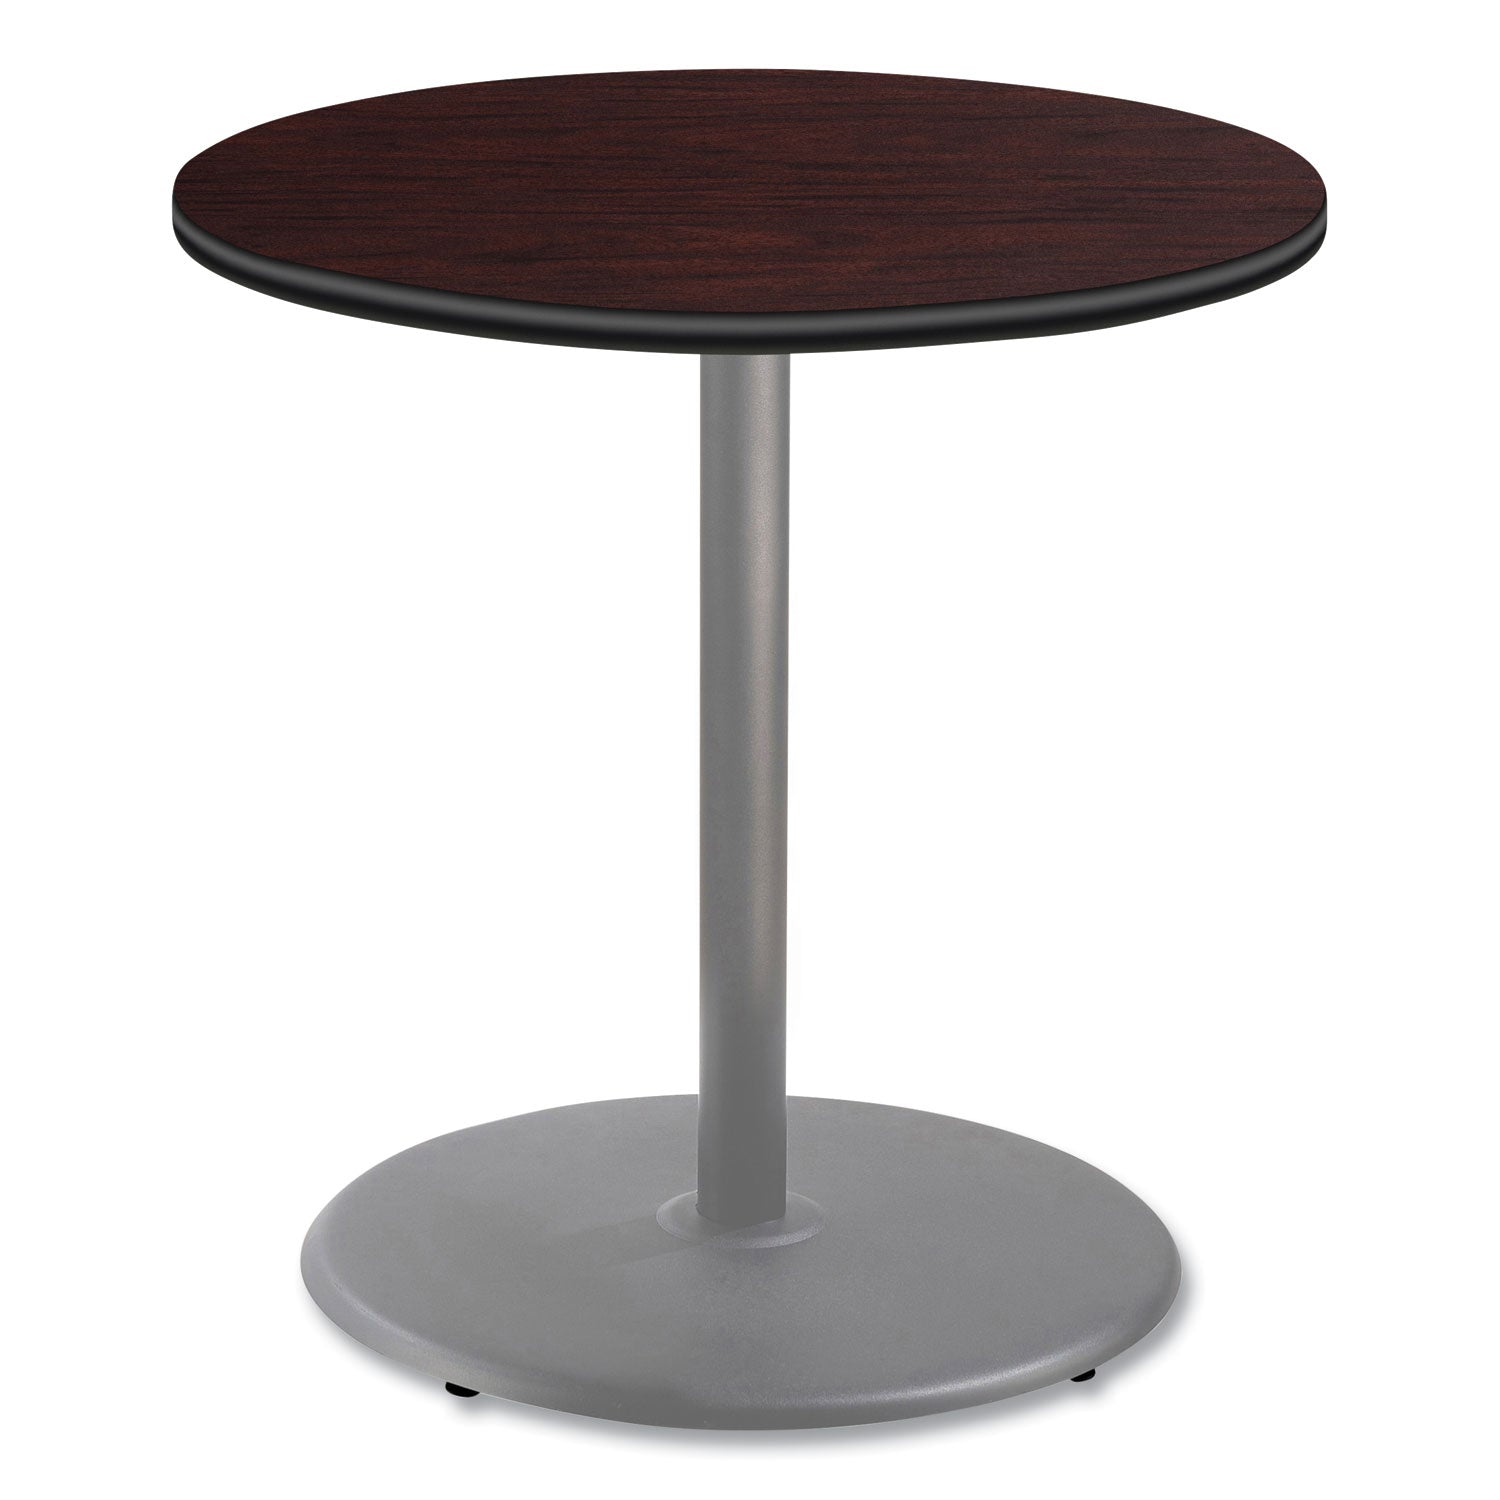 cafe-table-36-diameter-x-36h-round-top-base-mahogany-top-gray-base-ships-in-7-10-business-days_npscg13636rc1my - 1